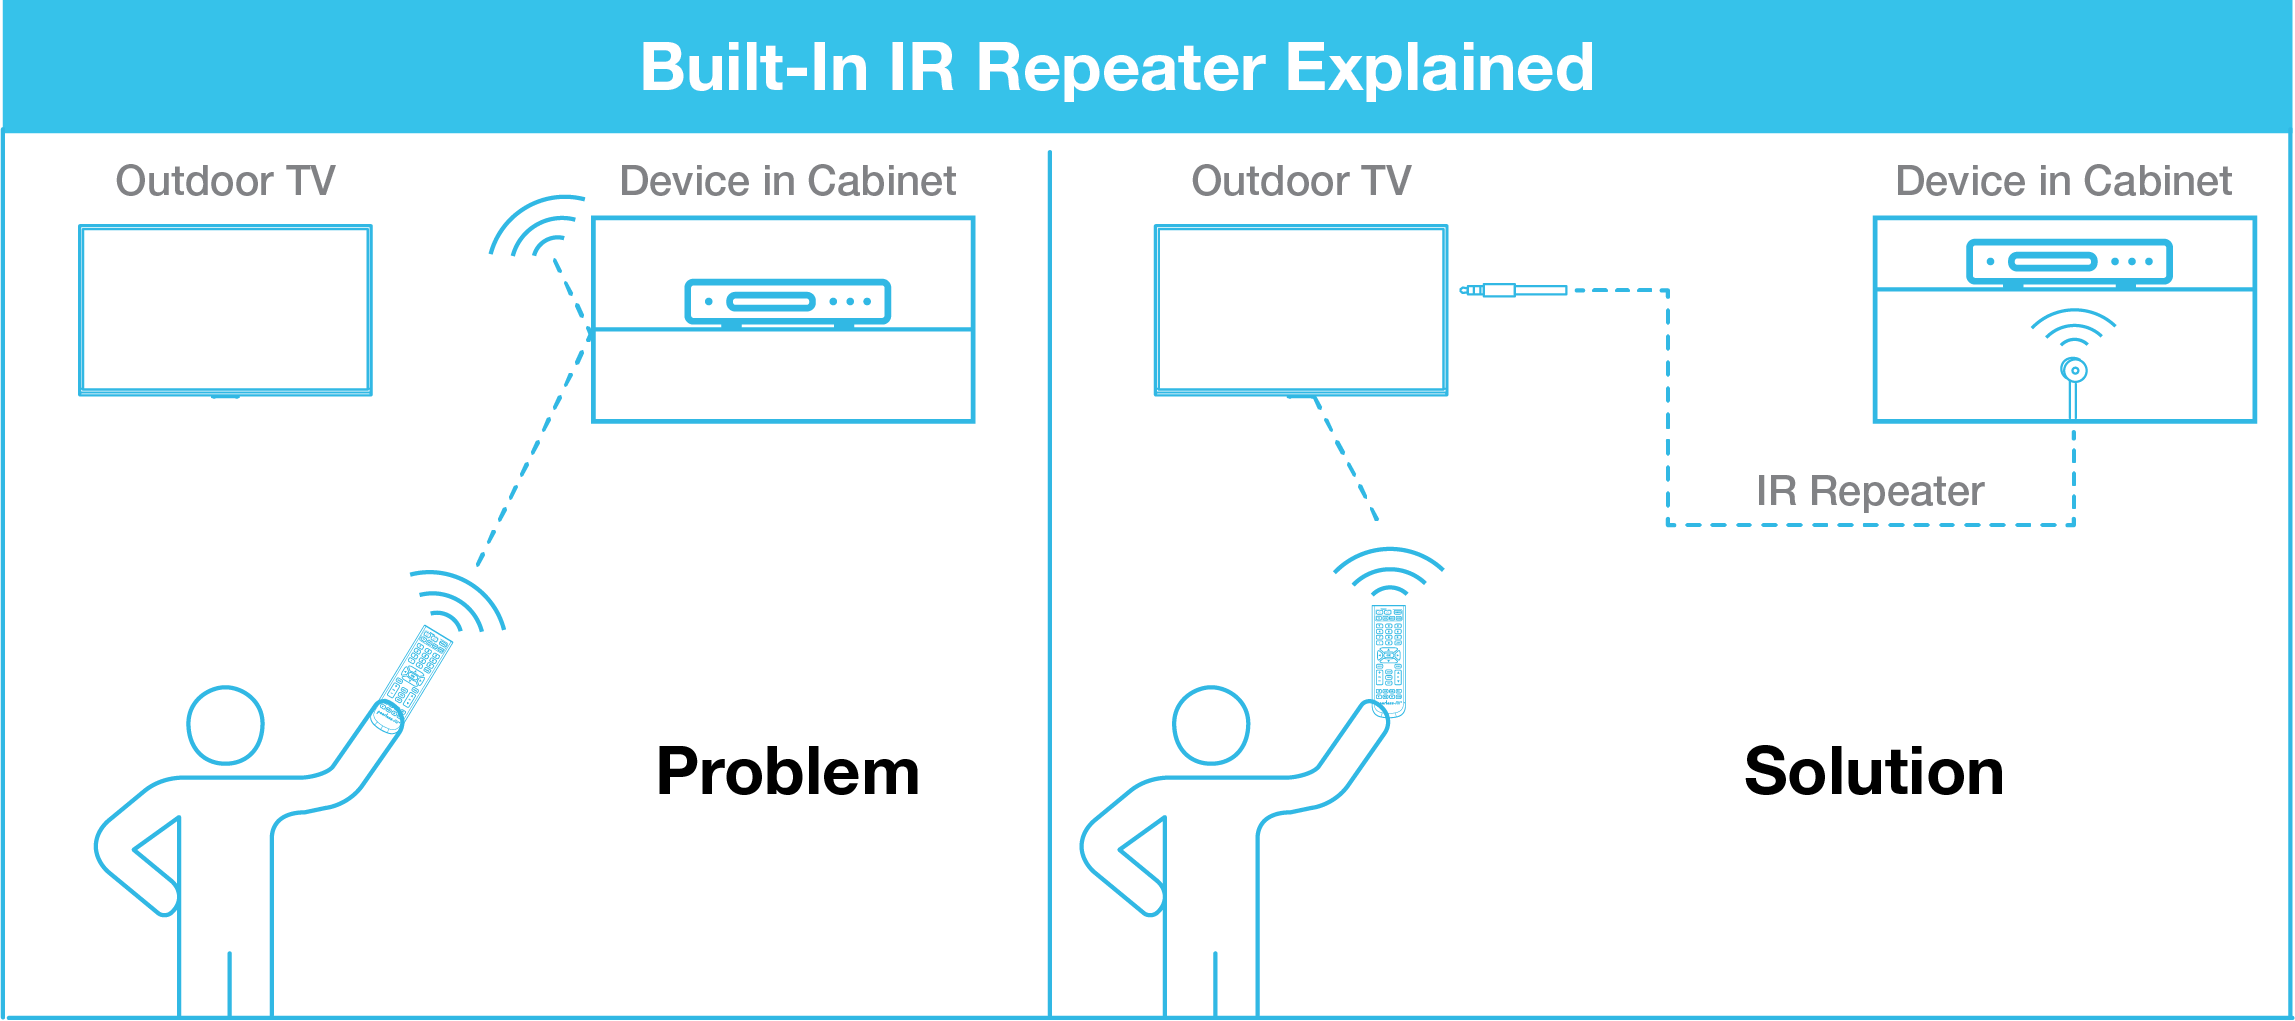 Built-In IR Repeater Explained